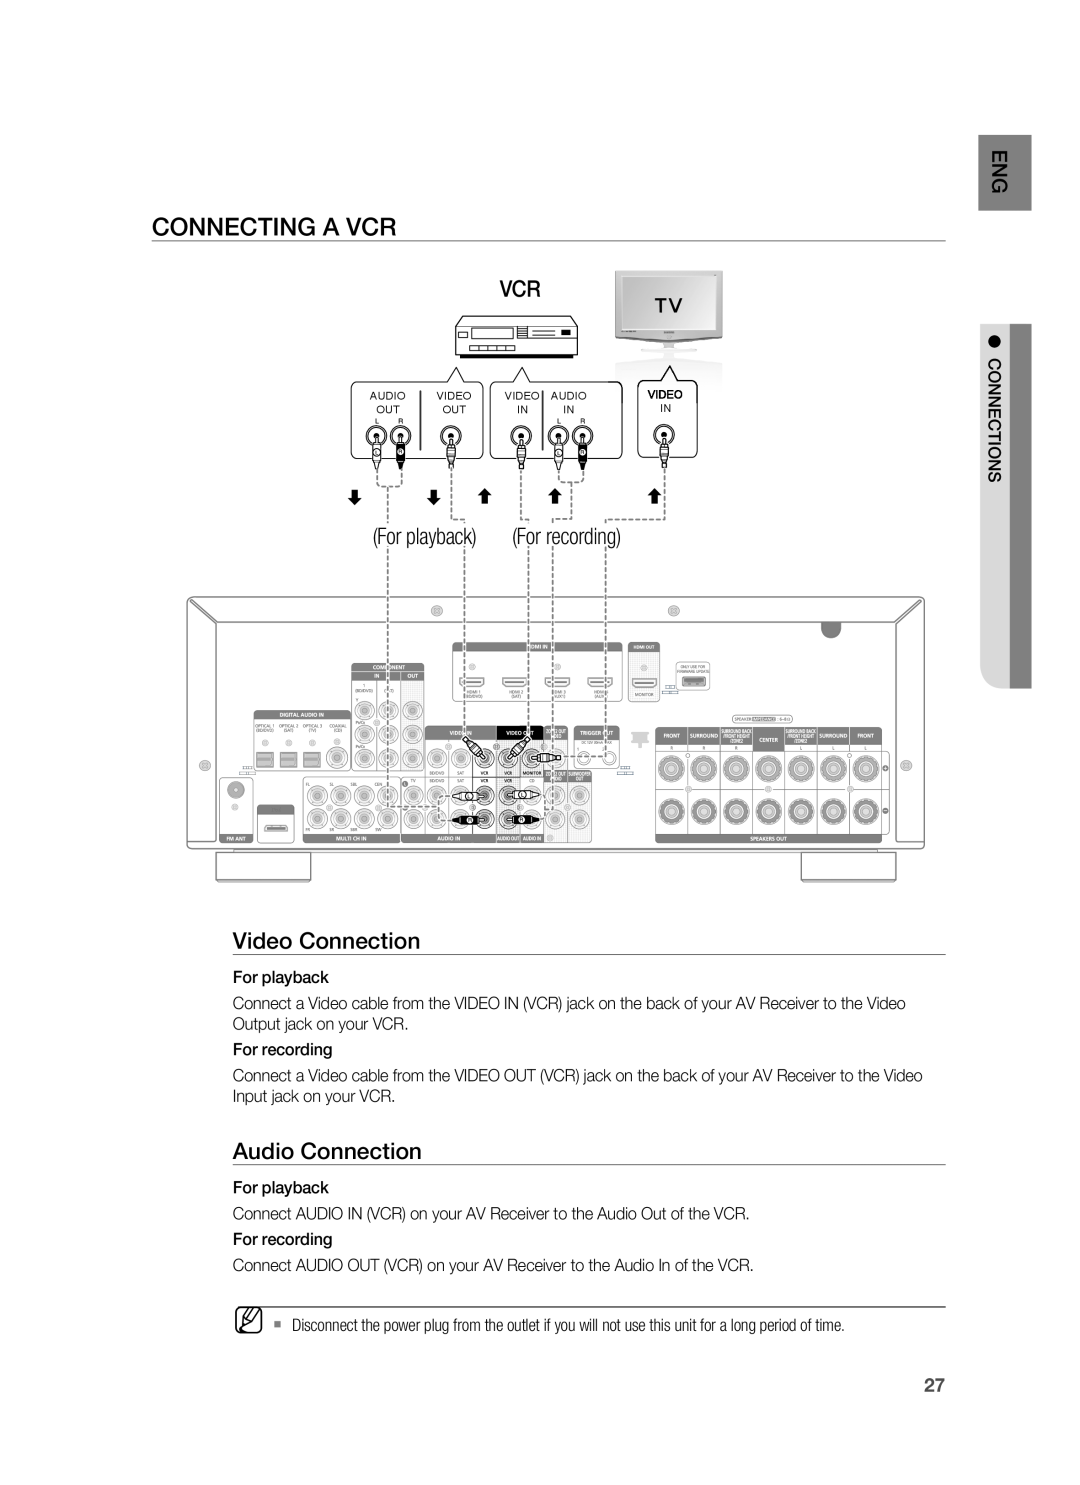 Samsung HW-C900-XAA user manual Connecting A Vcr, For playback For recording Video Connection, Audio Connection 